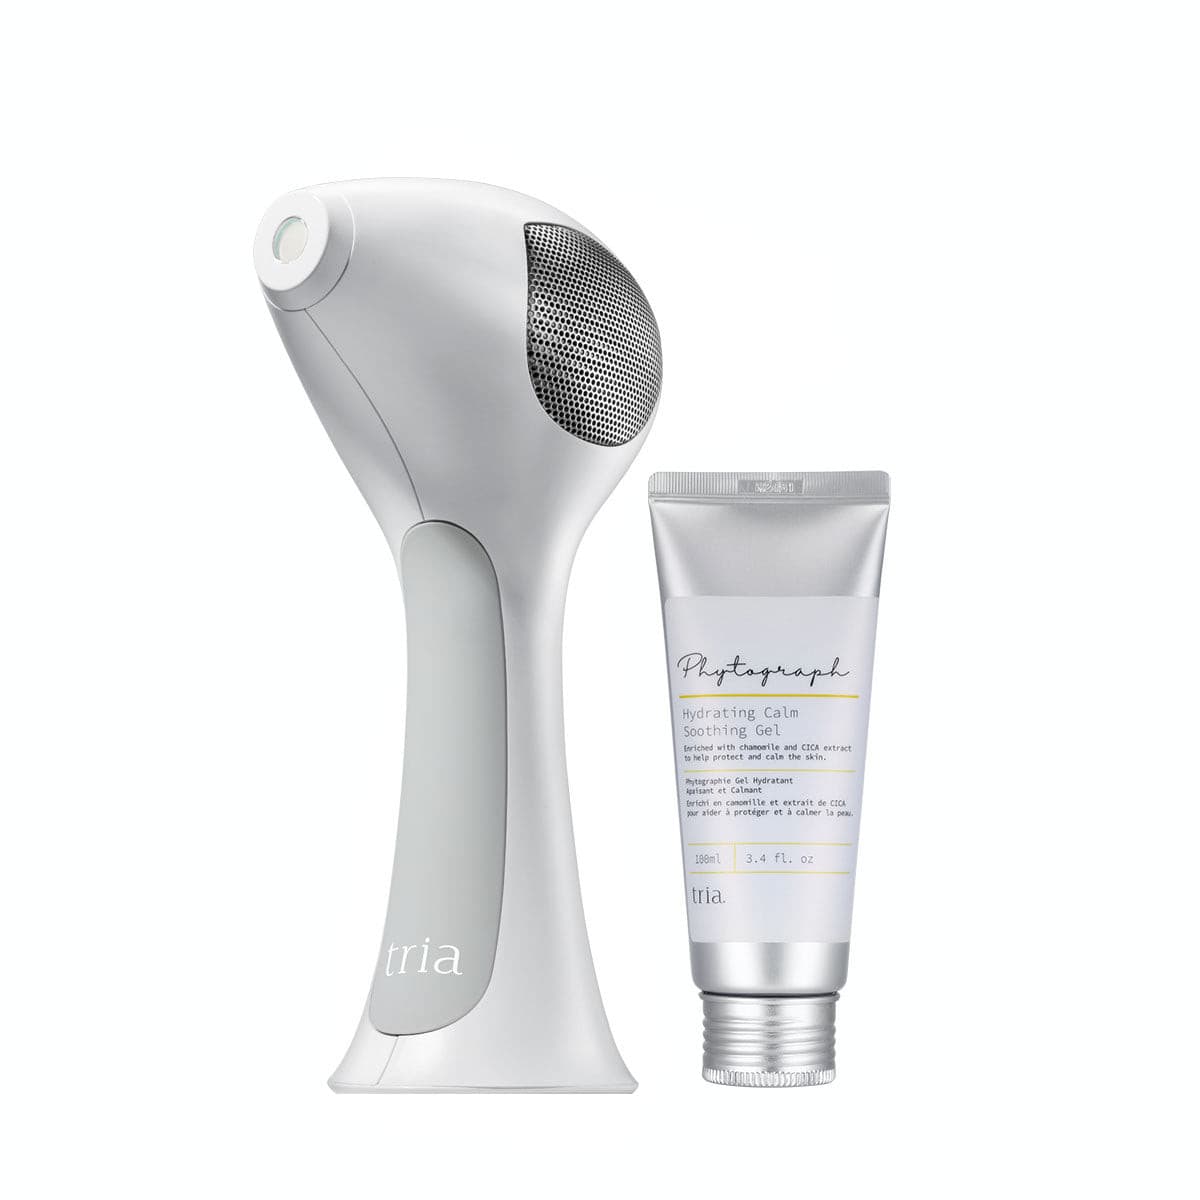 Hair Removal Laser 4X Deluxe Kit - Tria Beauty/Grey